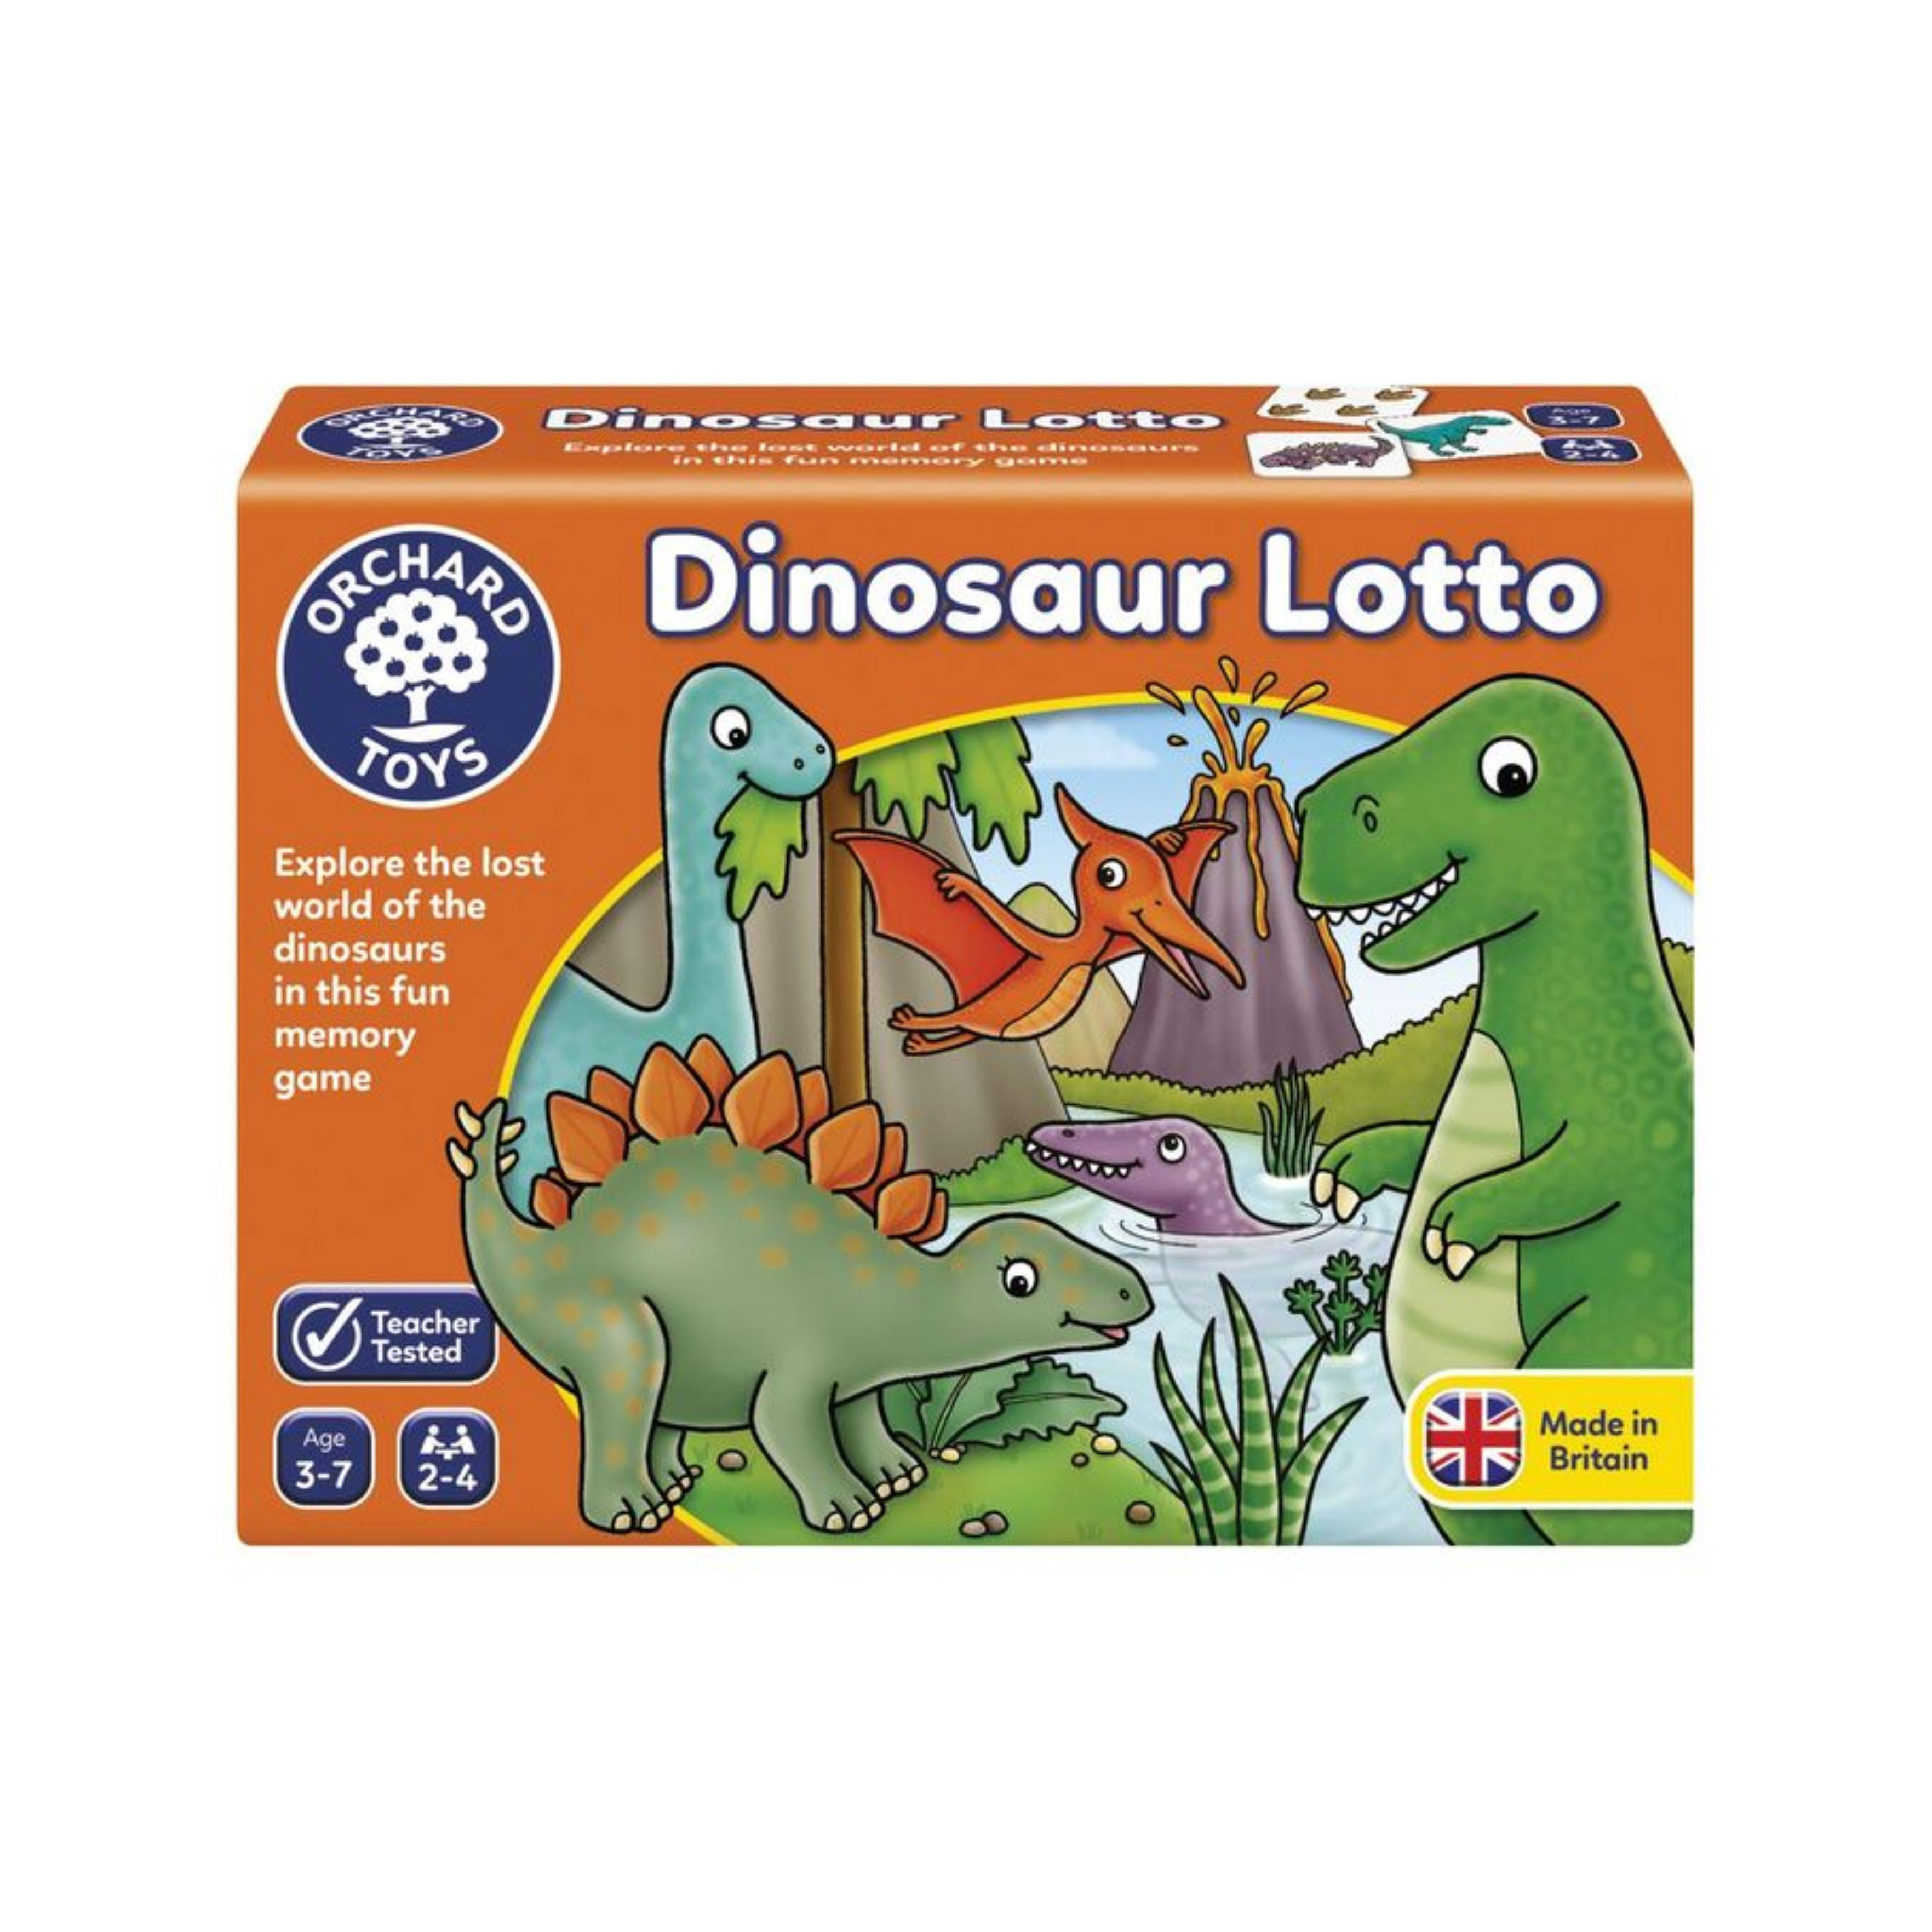 Orchard Toys Dinosaur Lotto Game 